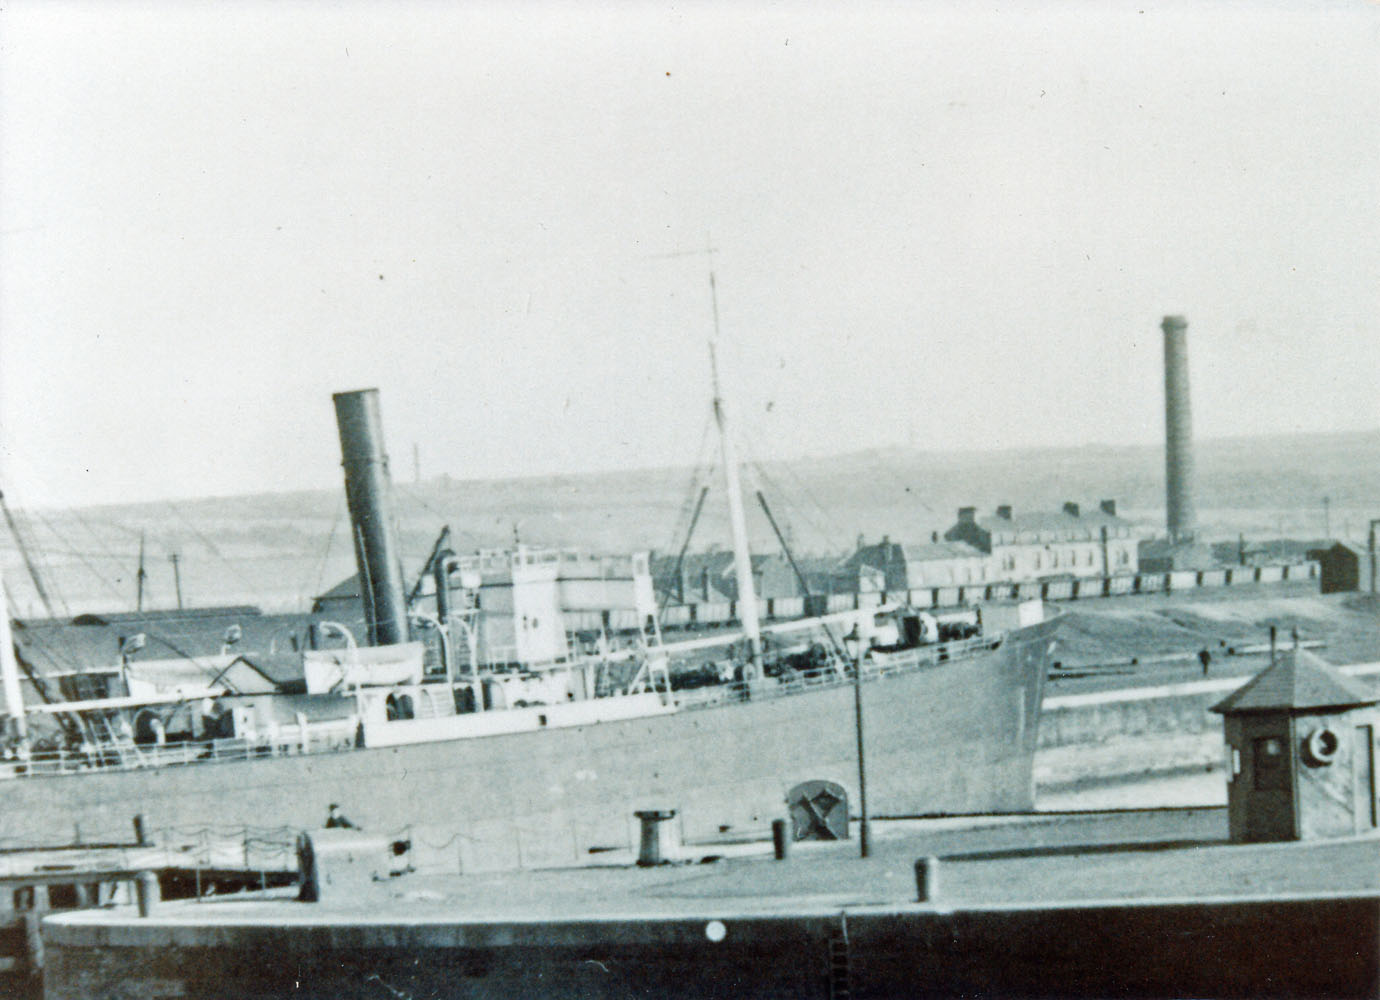 Maryport Harbour Senhouse Dock Steamship With Factory Chimney Behind